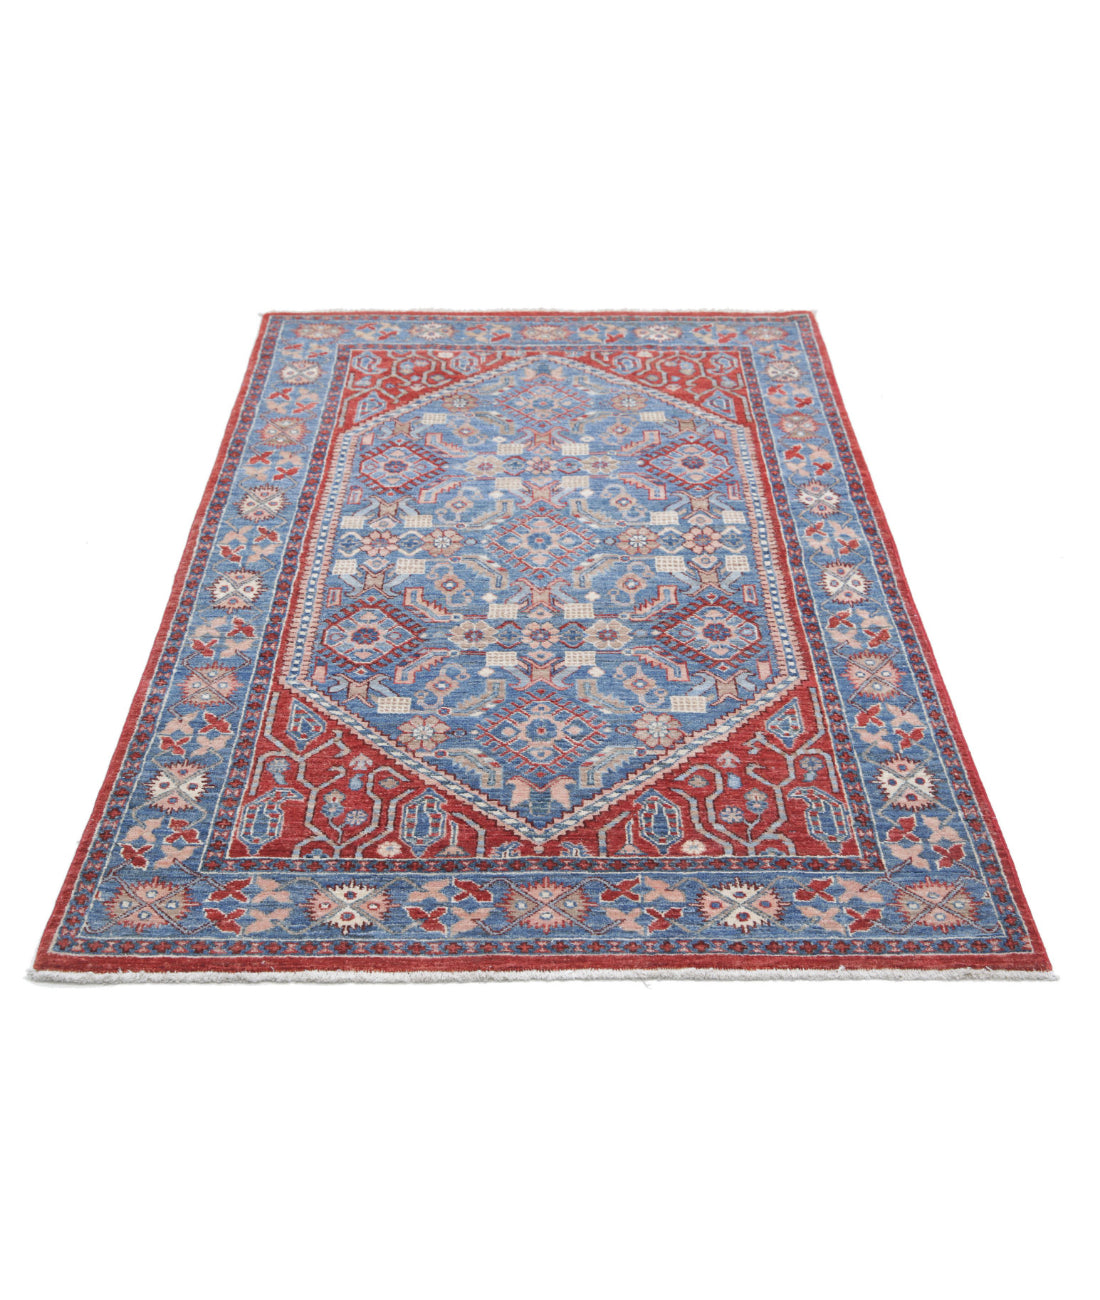 Heriz 3'8'' X 6'2'' Hand-Knotted Wool Rug 3'8'' x 6'2'' (110 X 185) / Red / Blue